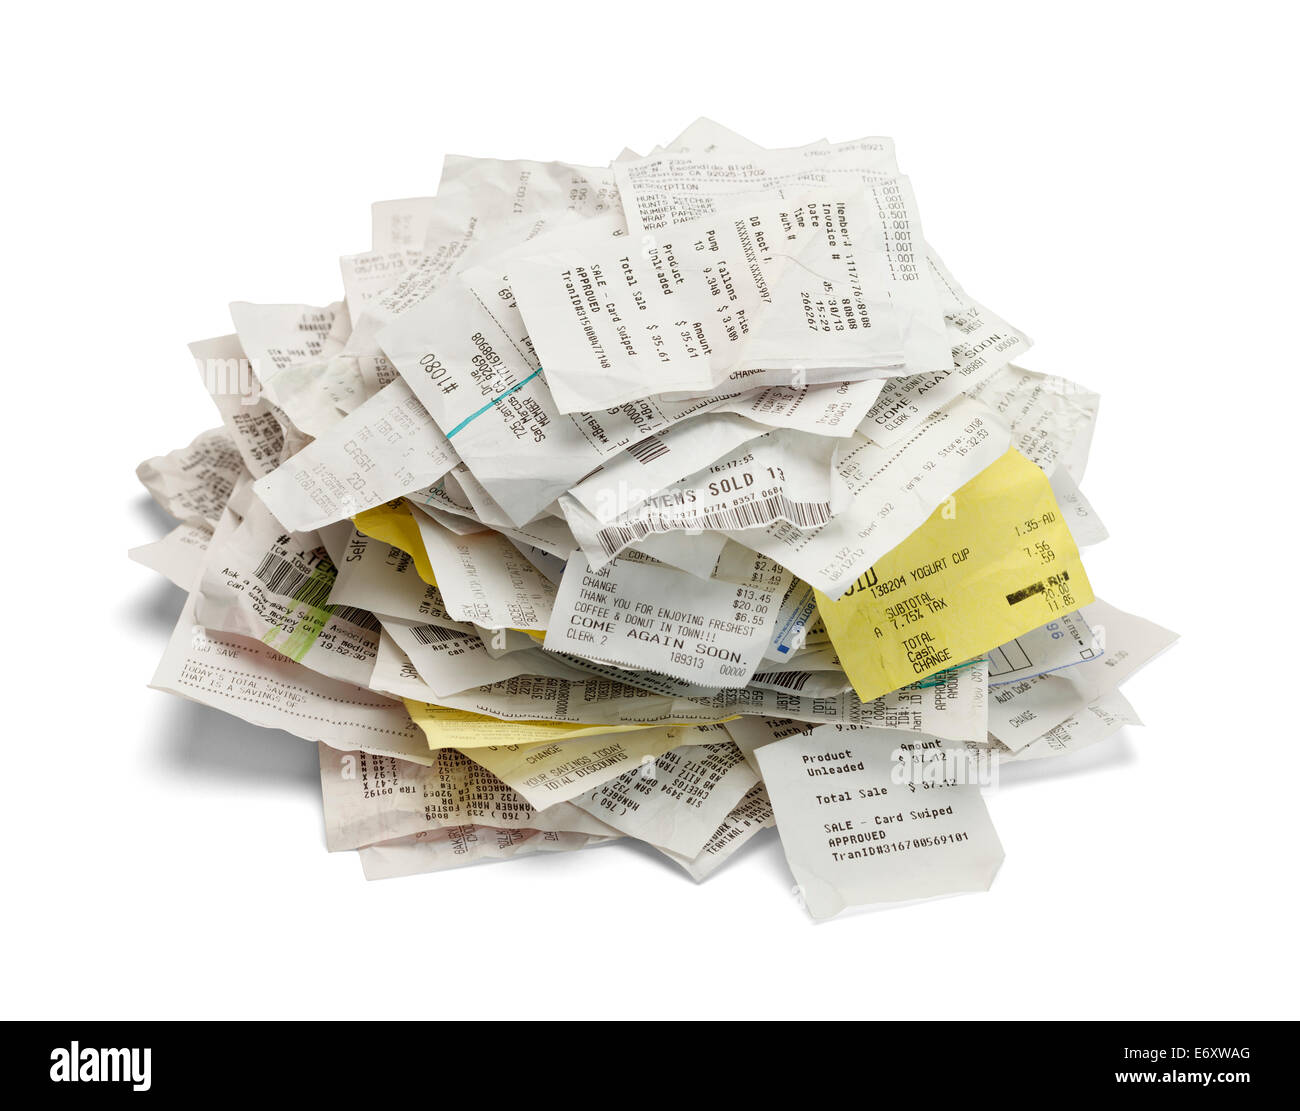 Heap of paper sales receipts in a mound isolated on white background. Stock Photo